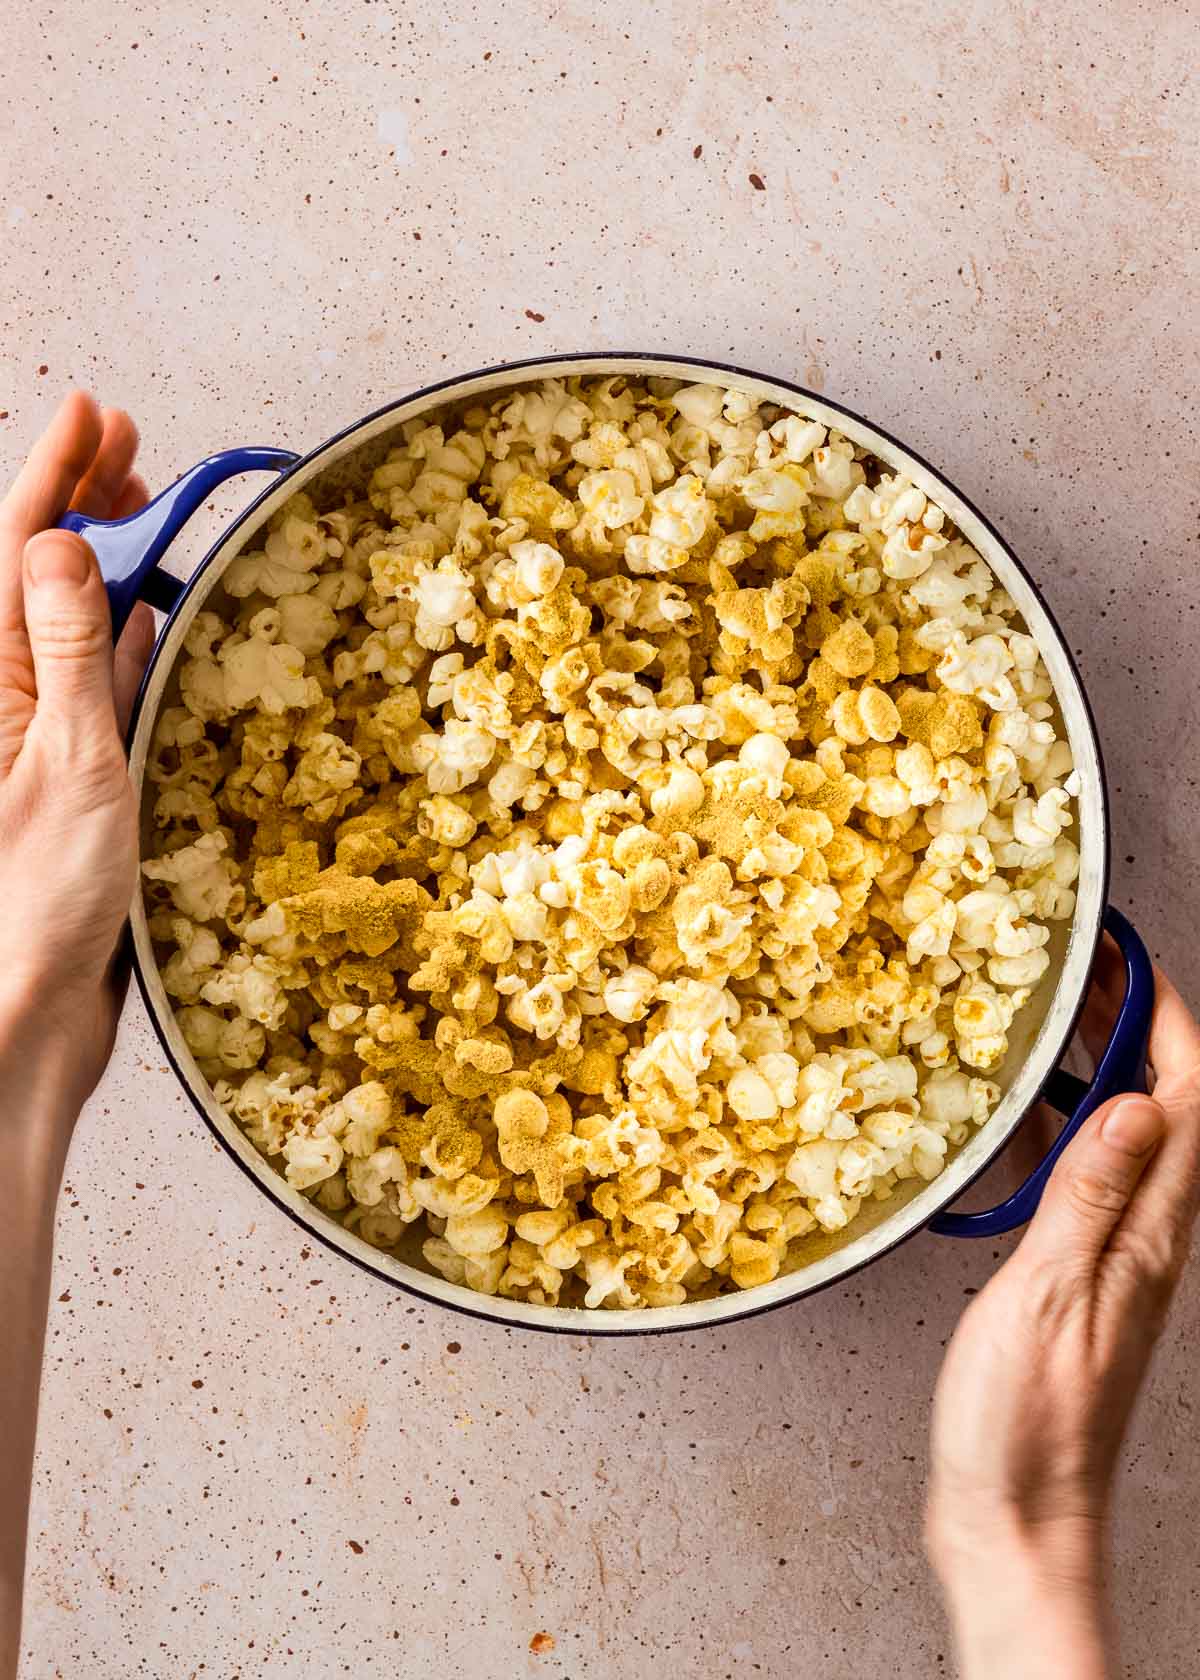 A large blue pot of vegan popcorn with cheesy seasoning being mixed into it. A woman's hands hold the pot handles.